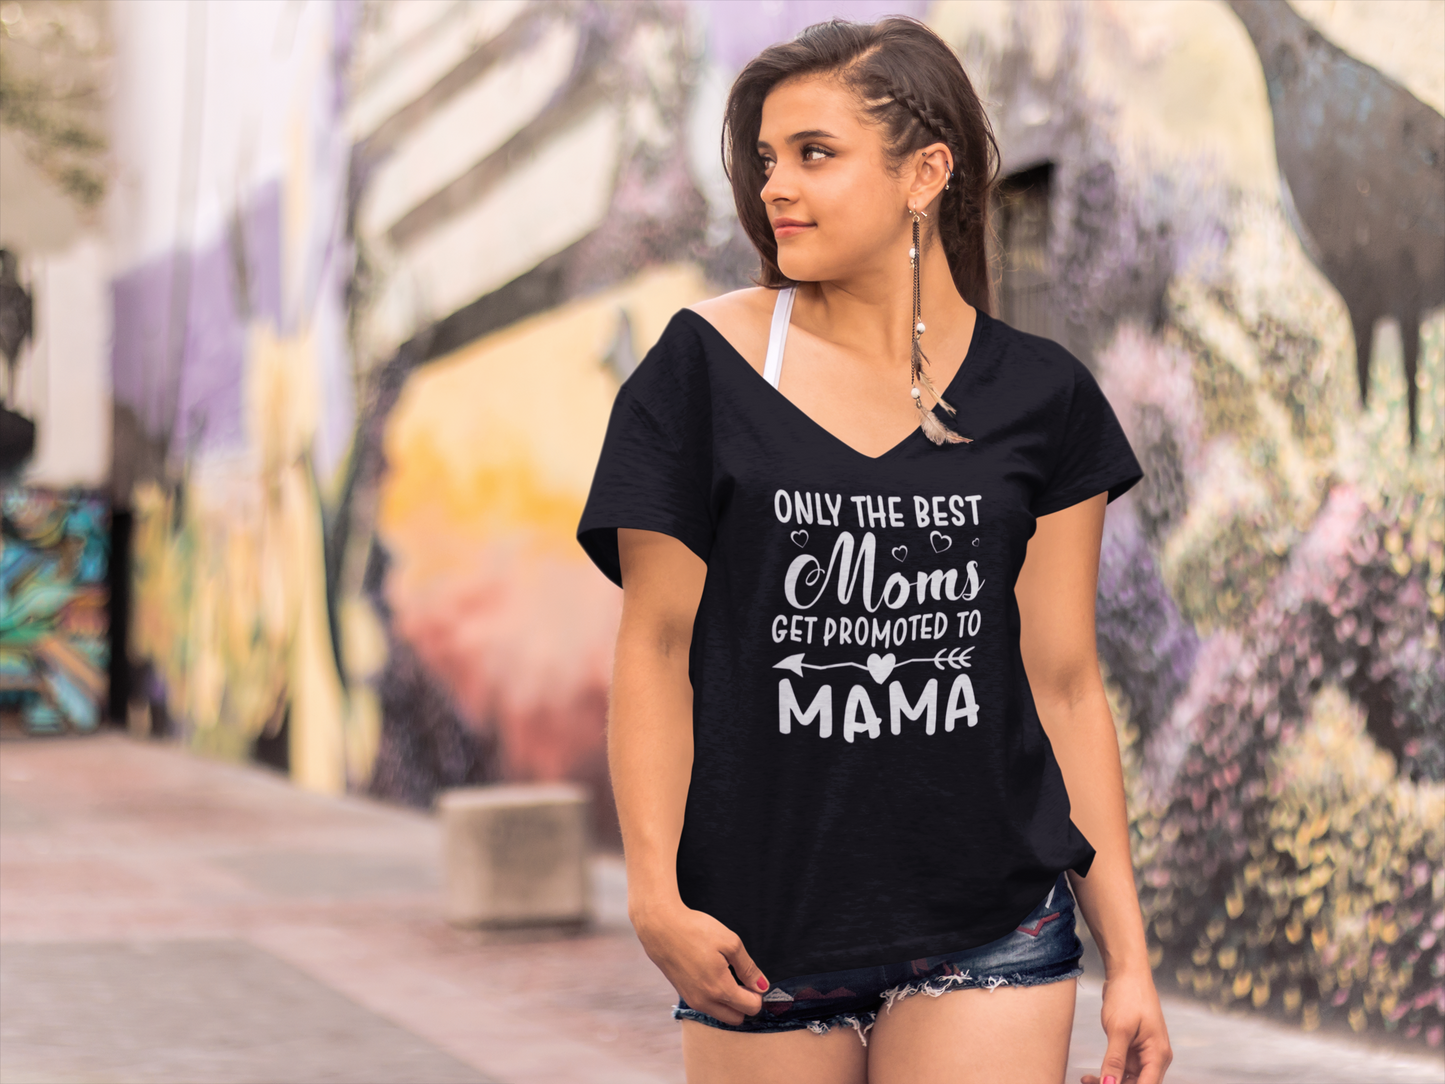 ULTRABASIC Women's T-Shirt Only the Best Moms Get Promoted to Mama - Mother Short Sleeve Tee Shirt